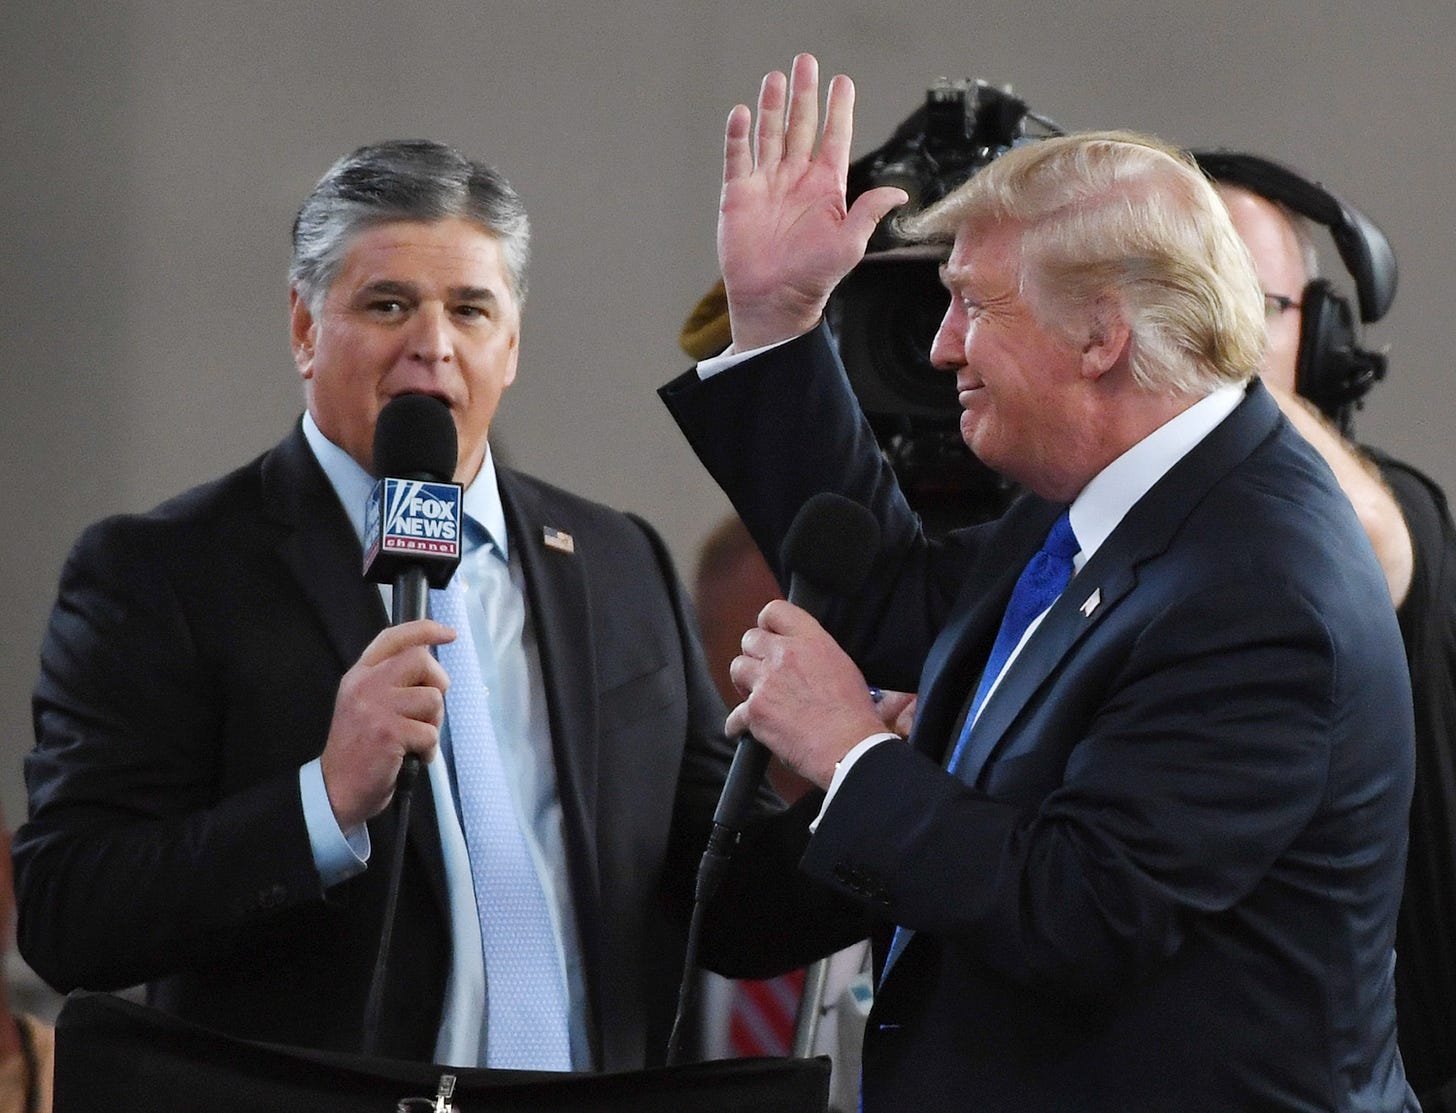 Two white men in suits stand on a stage, holding microphones. The one on the left has a mic branded "Fox News"